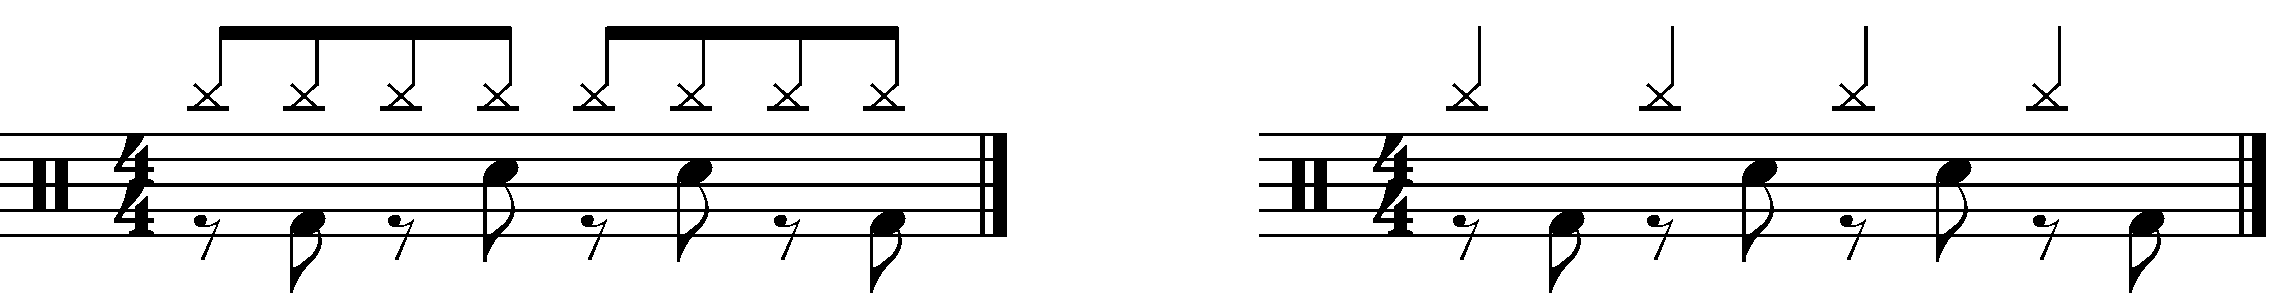 A an eighth note kick snare pattern avoiding the quarter notes